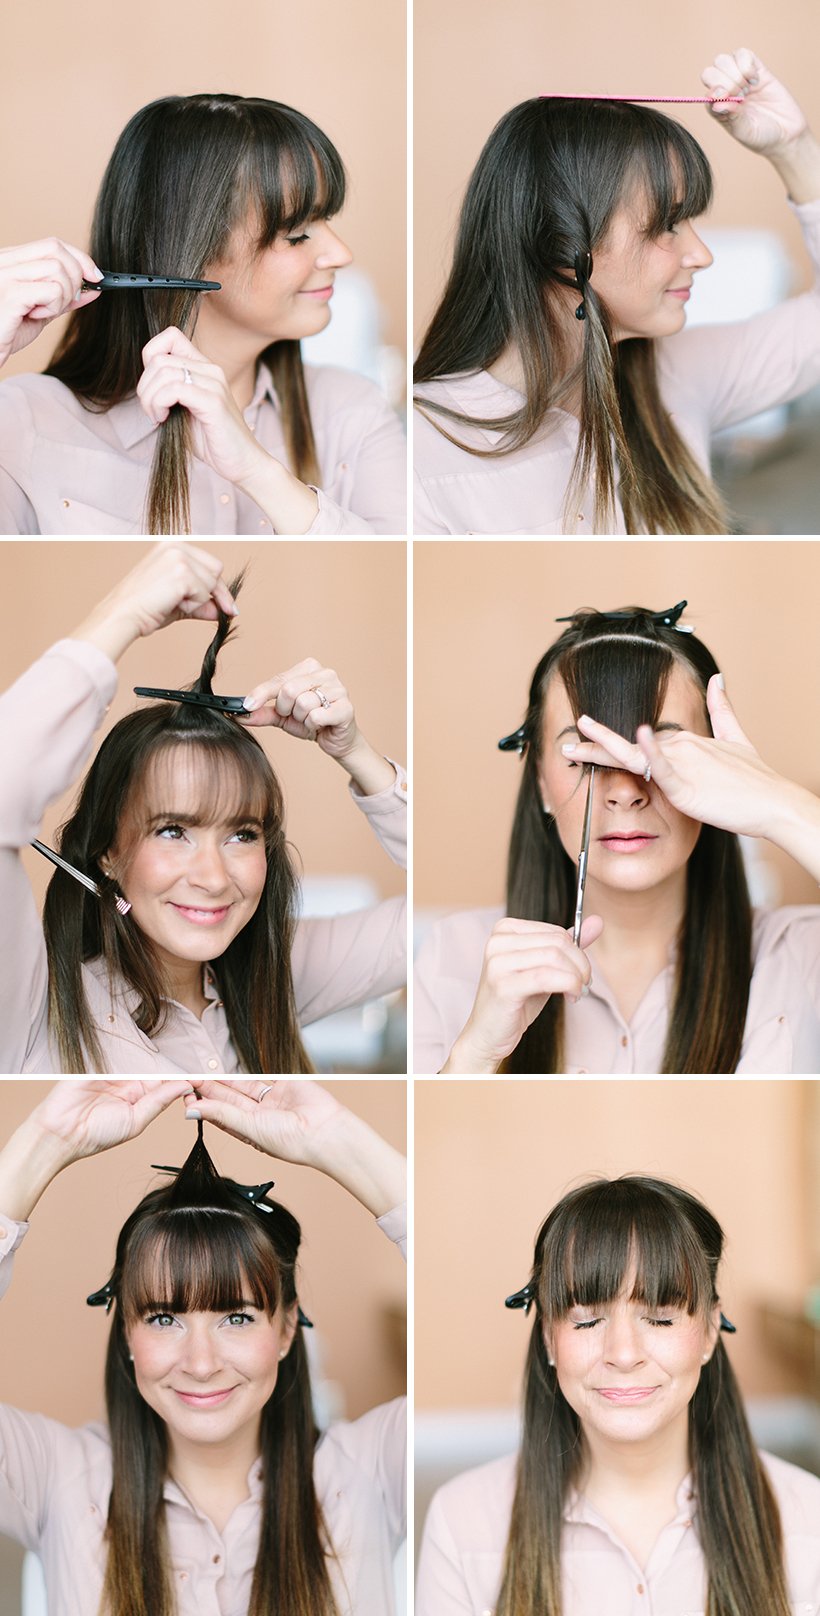  How To Cut Your Own Fringe Korean Style for Rounded Face